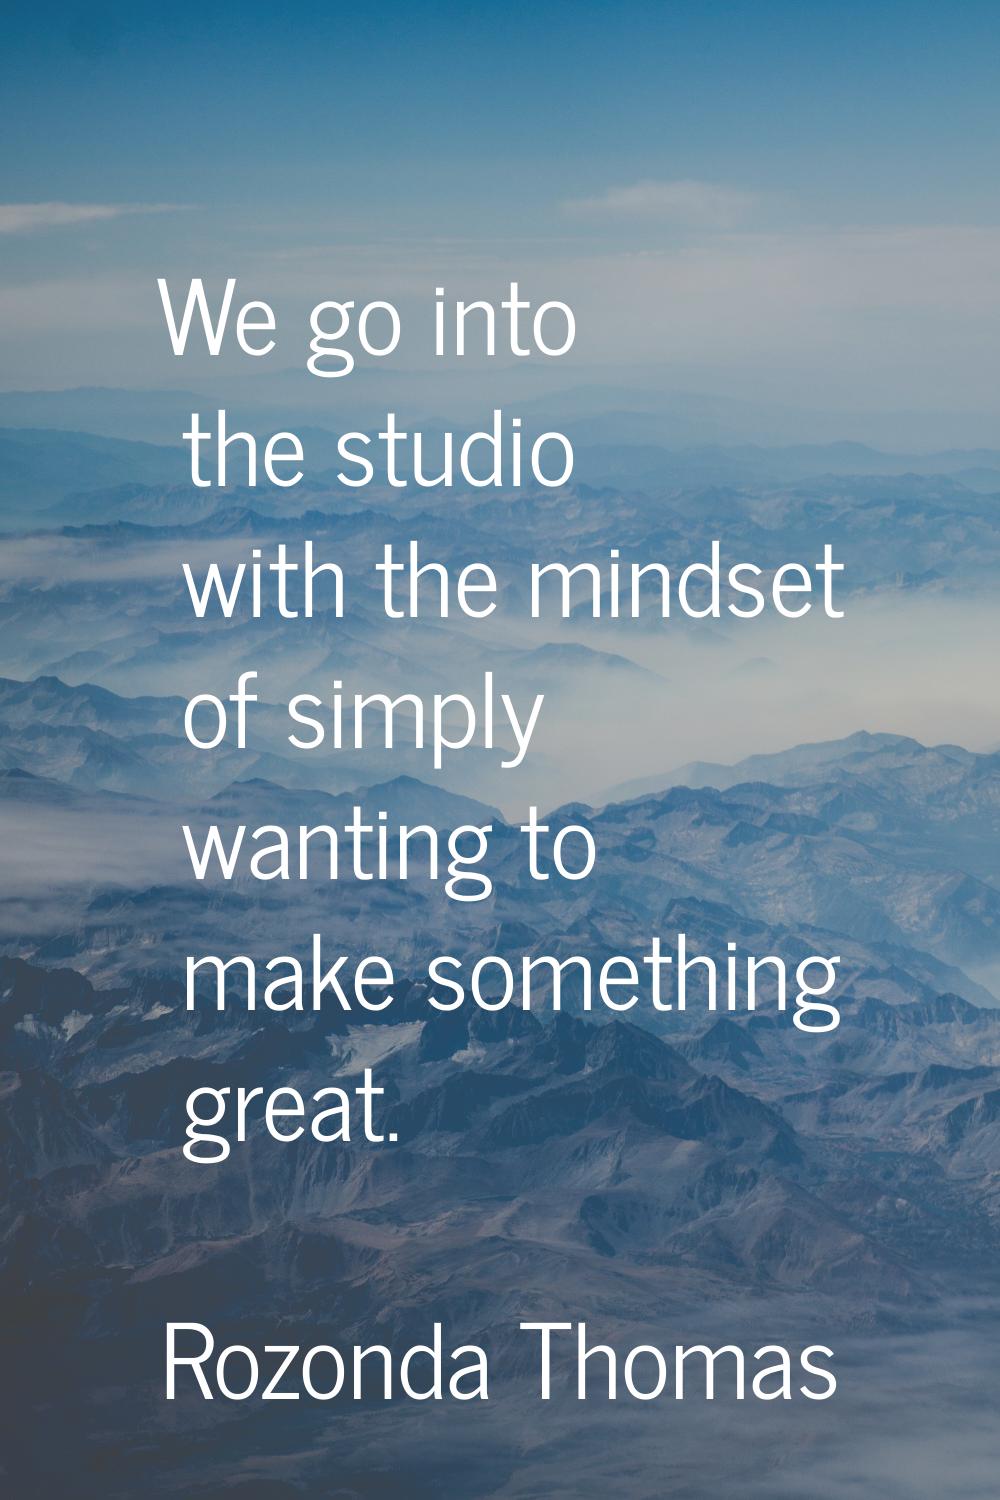 We go into the studio with the mindset of simply wanting to make something great.